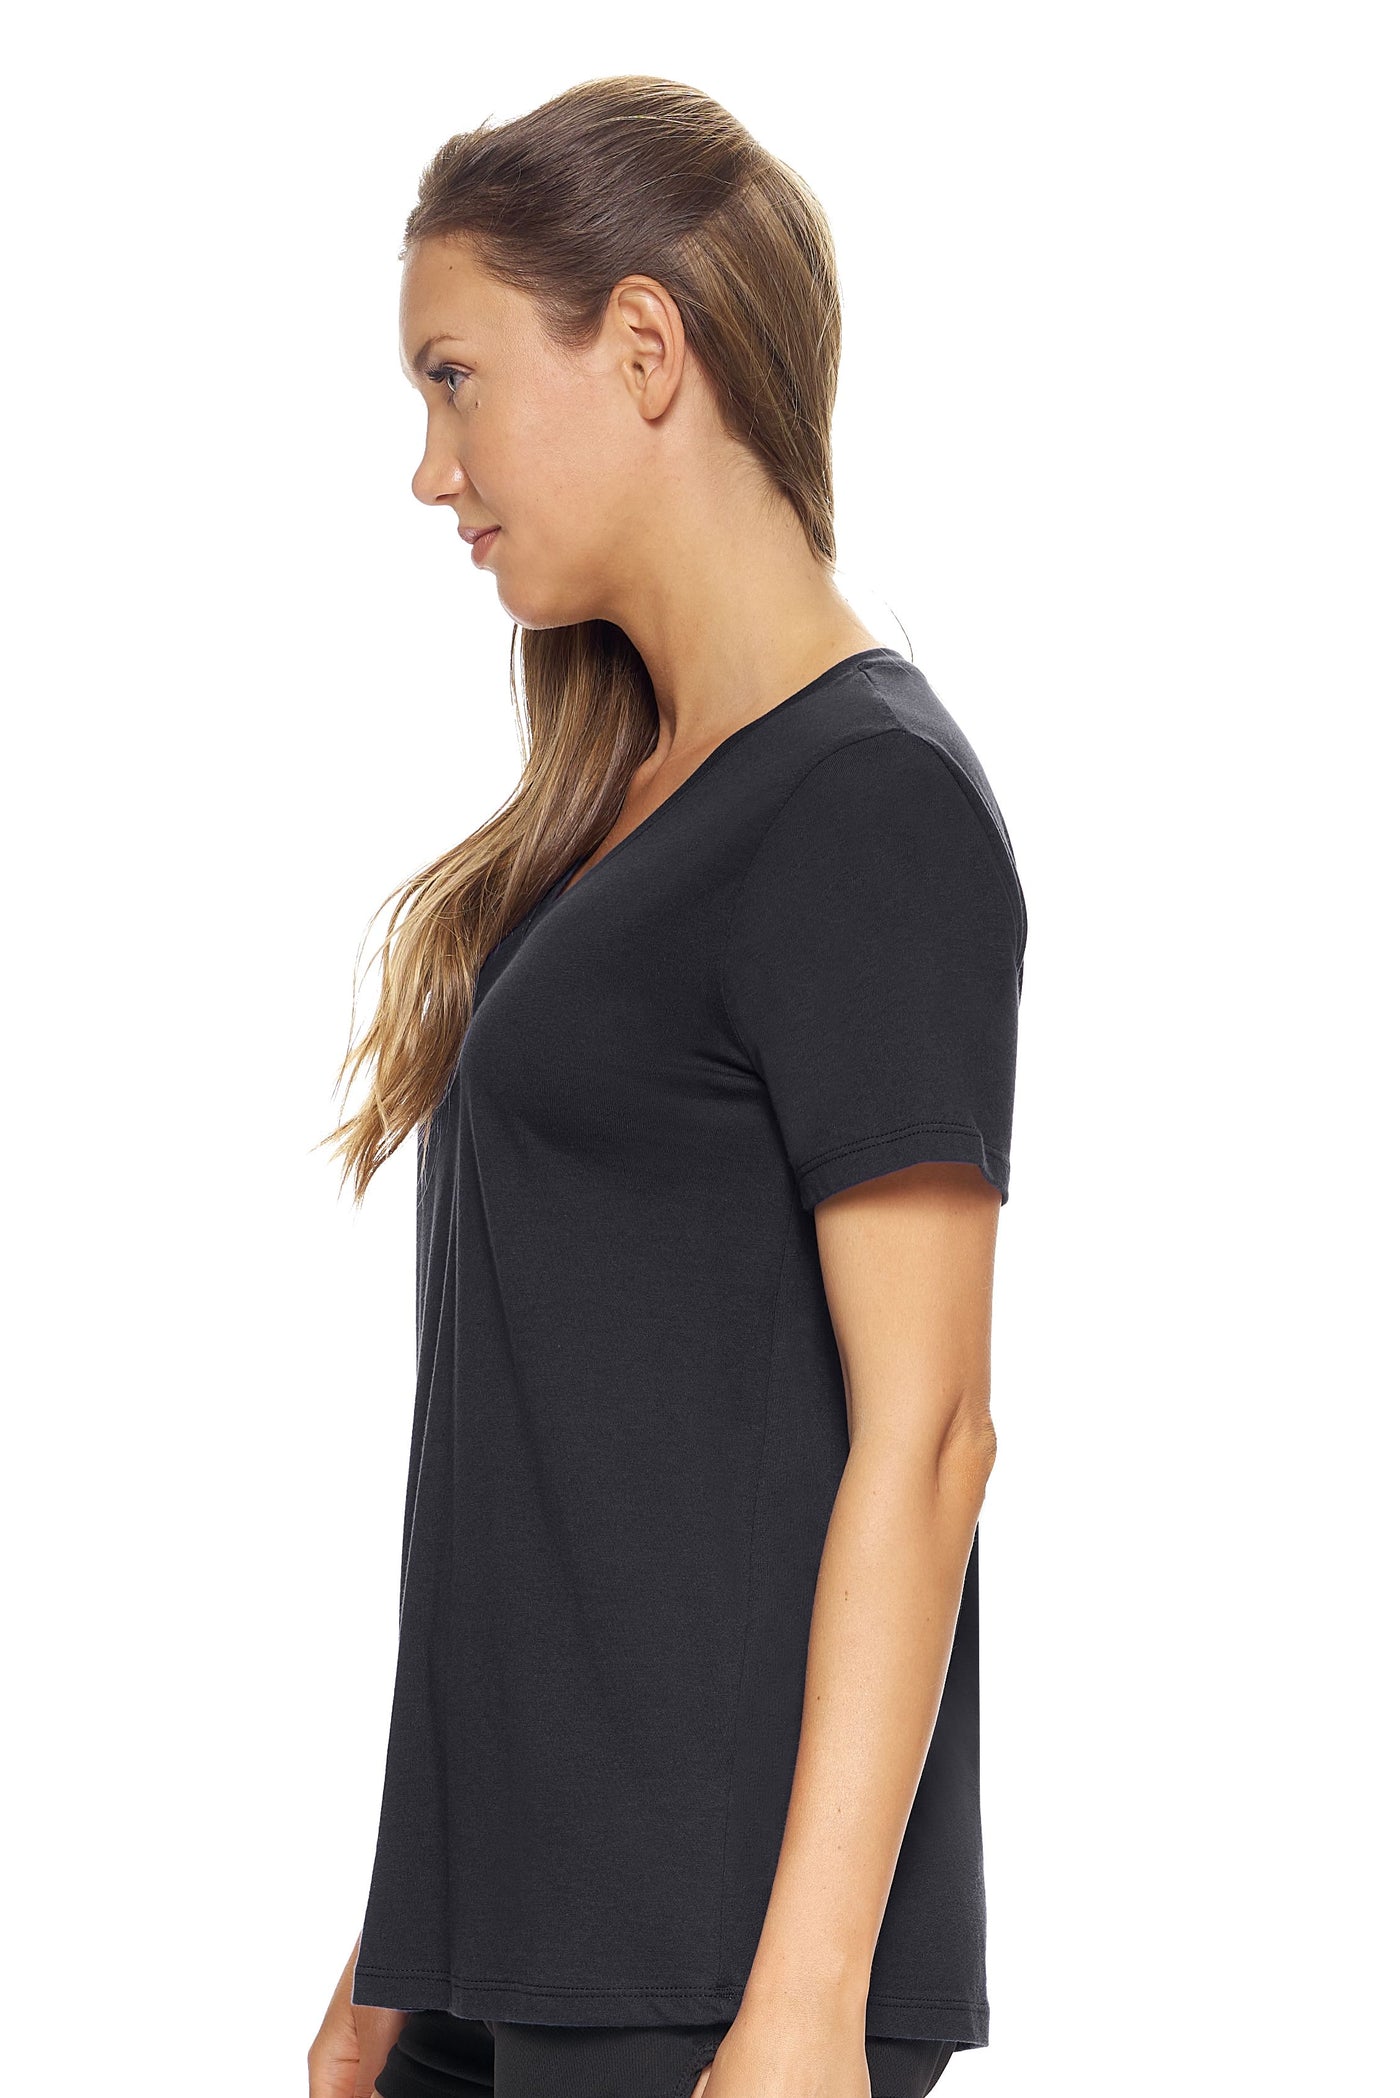 Expert Brand Retail Sustainable Eco-Friendly Micromodal Cotton Women's V-neck T-shirt Made in the USA black 2#color_black